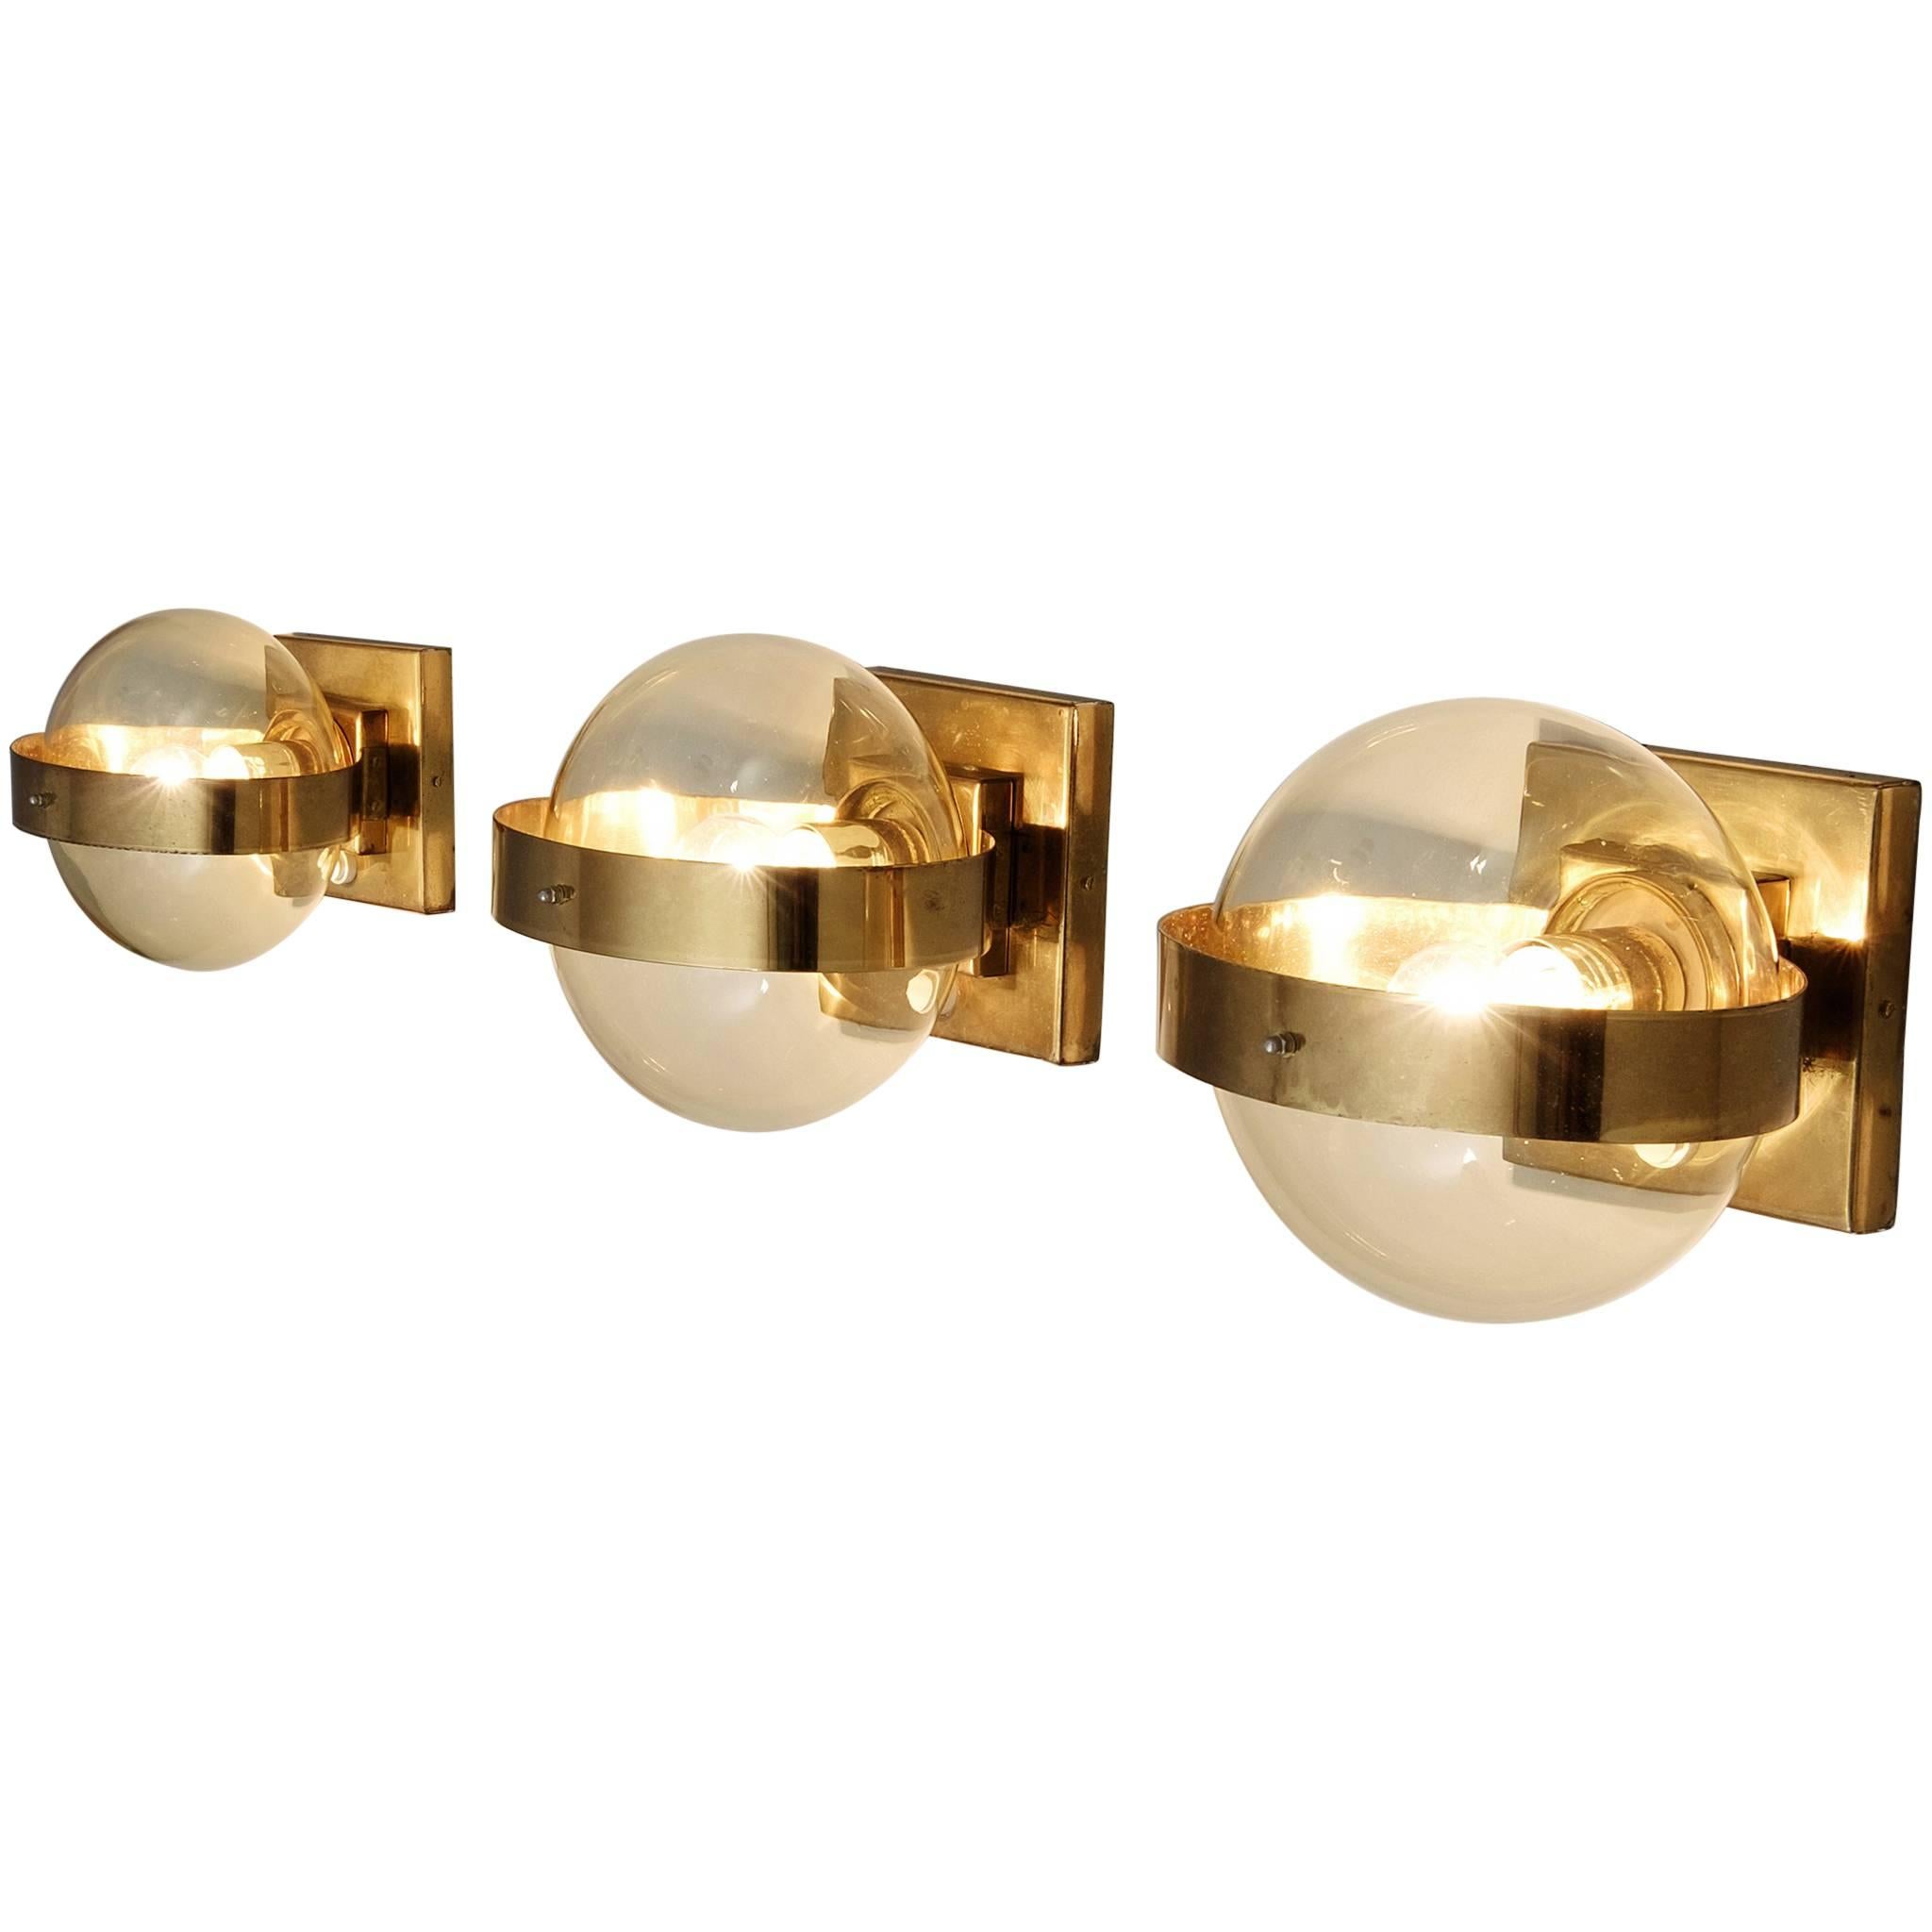 Set of 2 Wall Lights in Brass and Glass